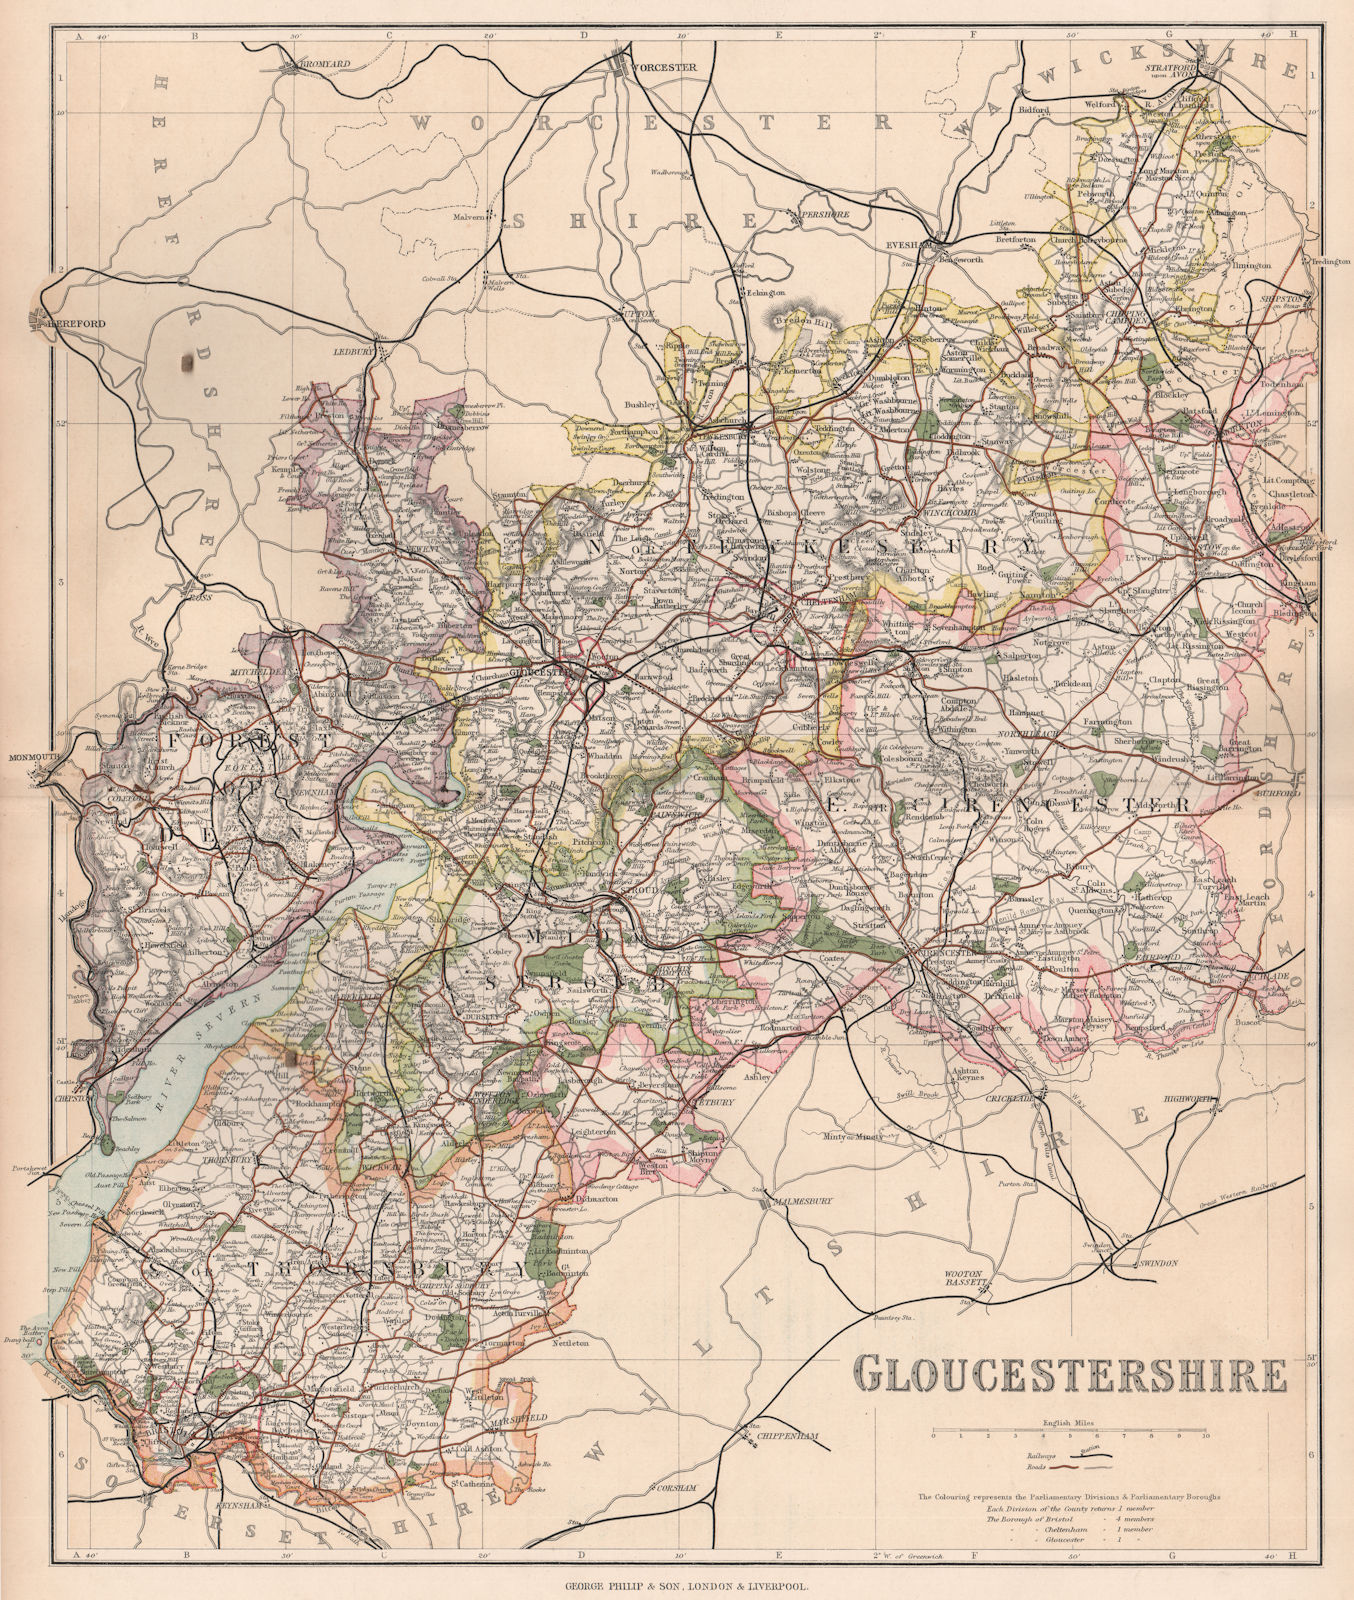 GLOUCESTERSHIRE. County map. Divisions & parliamentary boroughs. PHILIP 1902